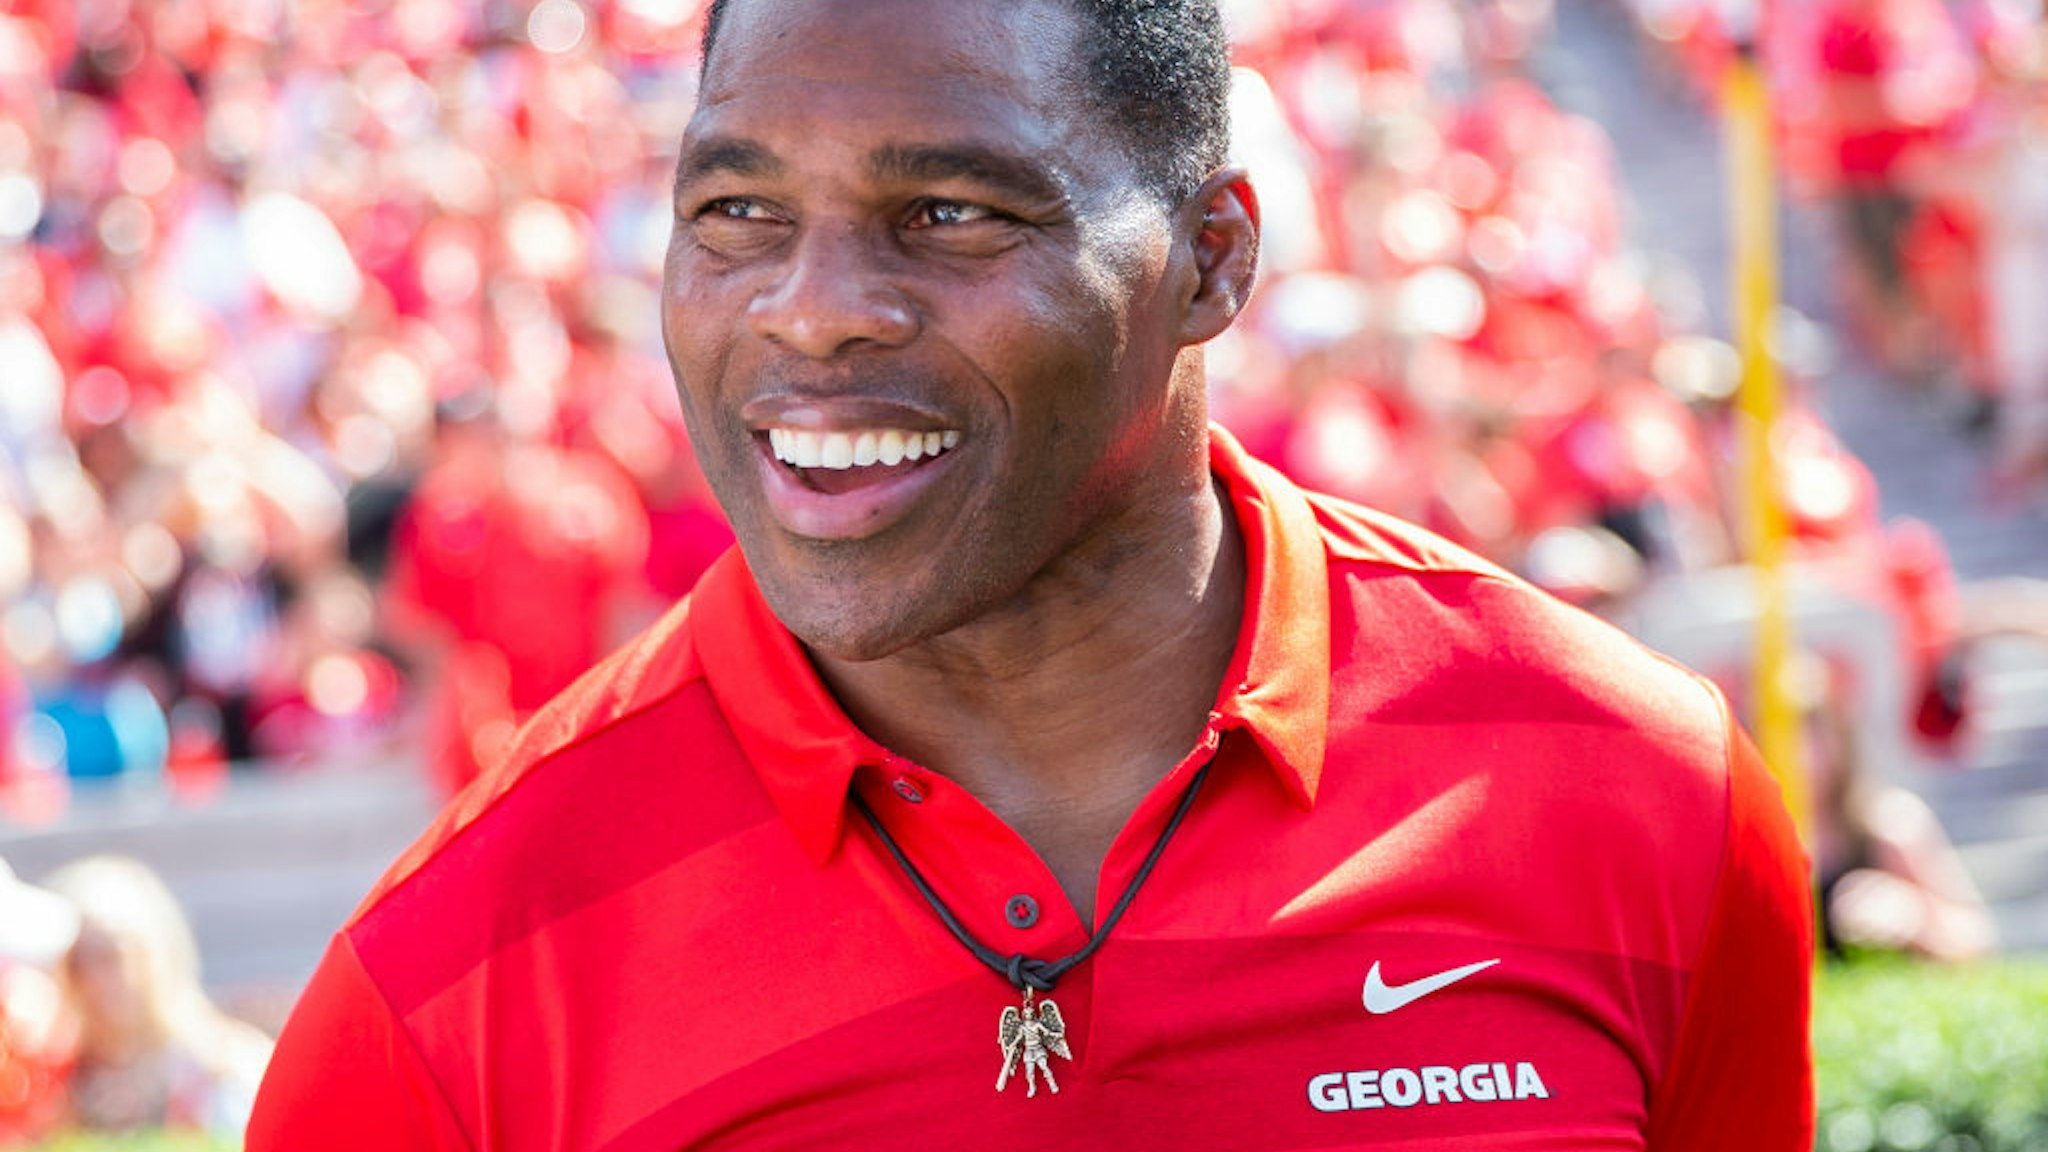 Georgia alum Herschel Walker on the sidelines during a game between Murray State Racers and University of Georgia Bulldogs at Sanford Stadium on September 7, 2019 in Athens, Georgia.